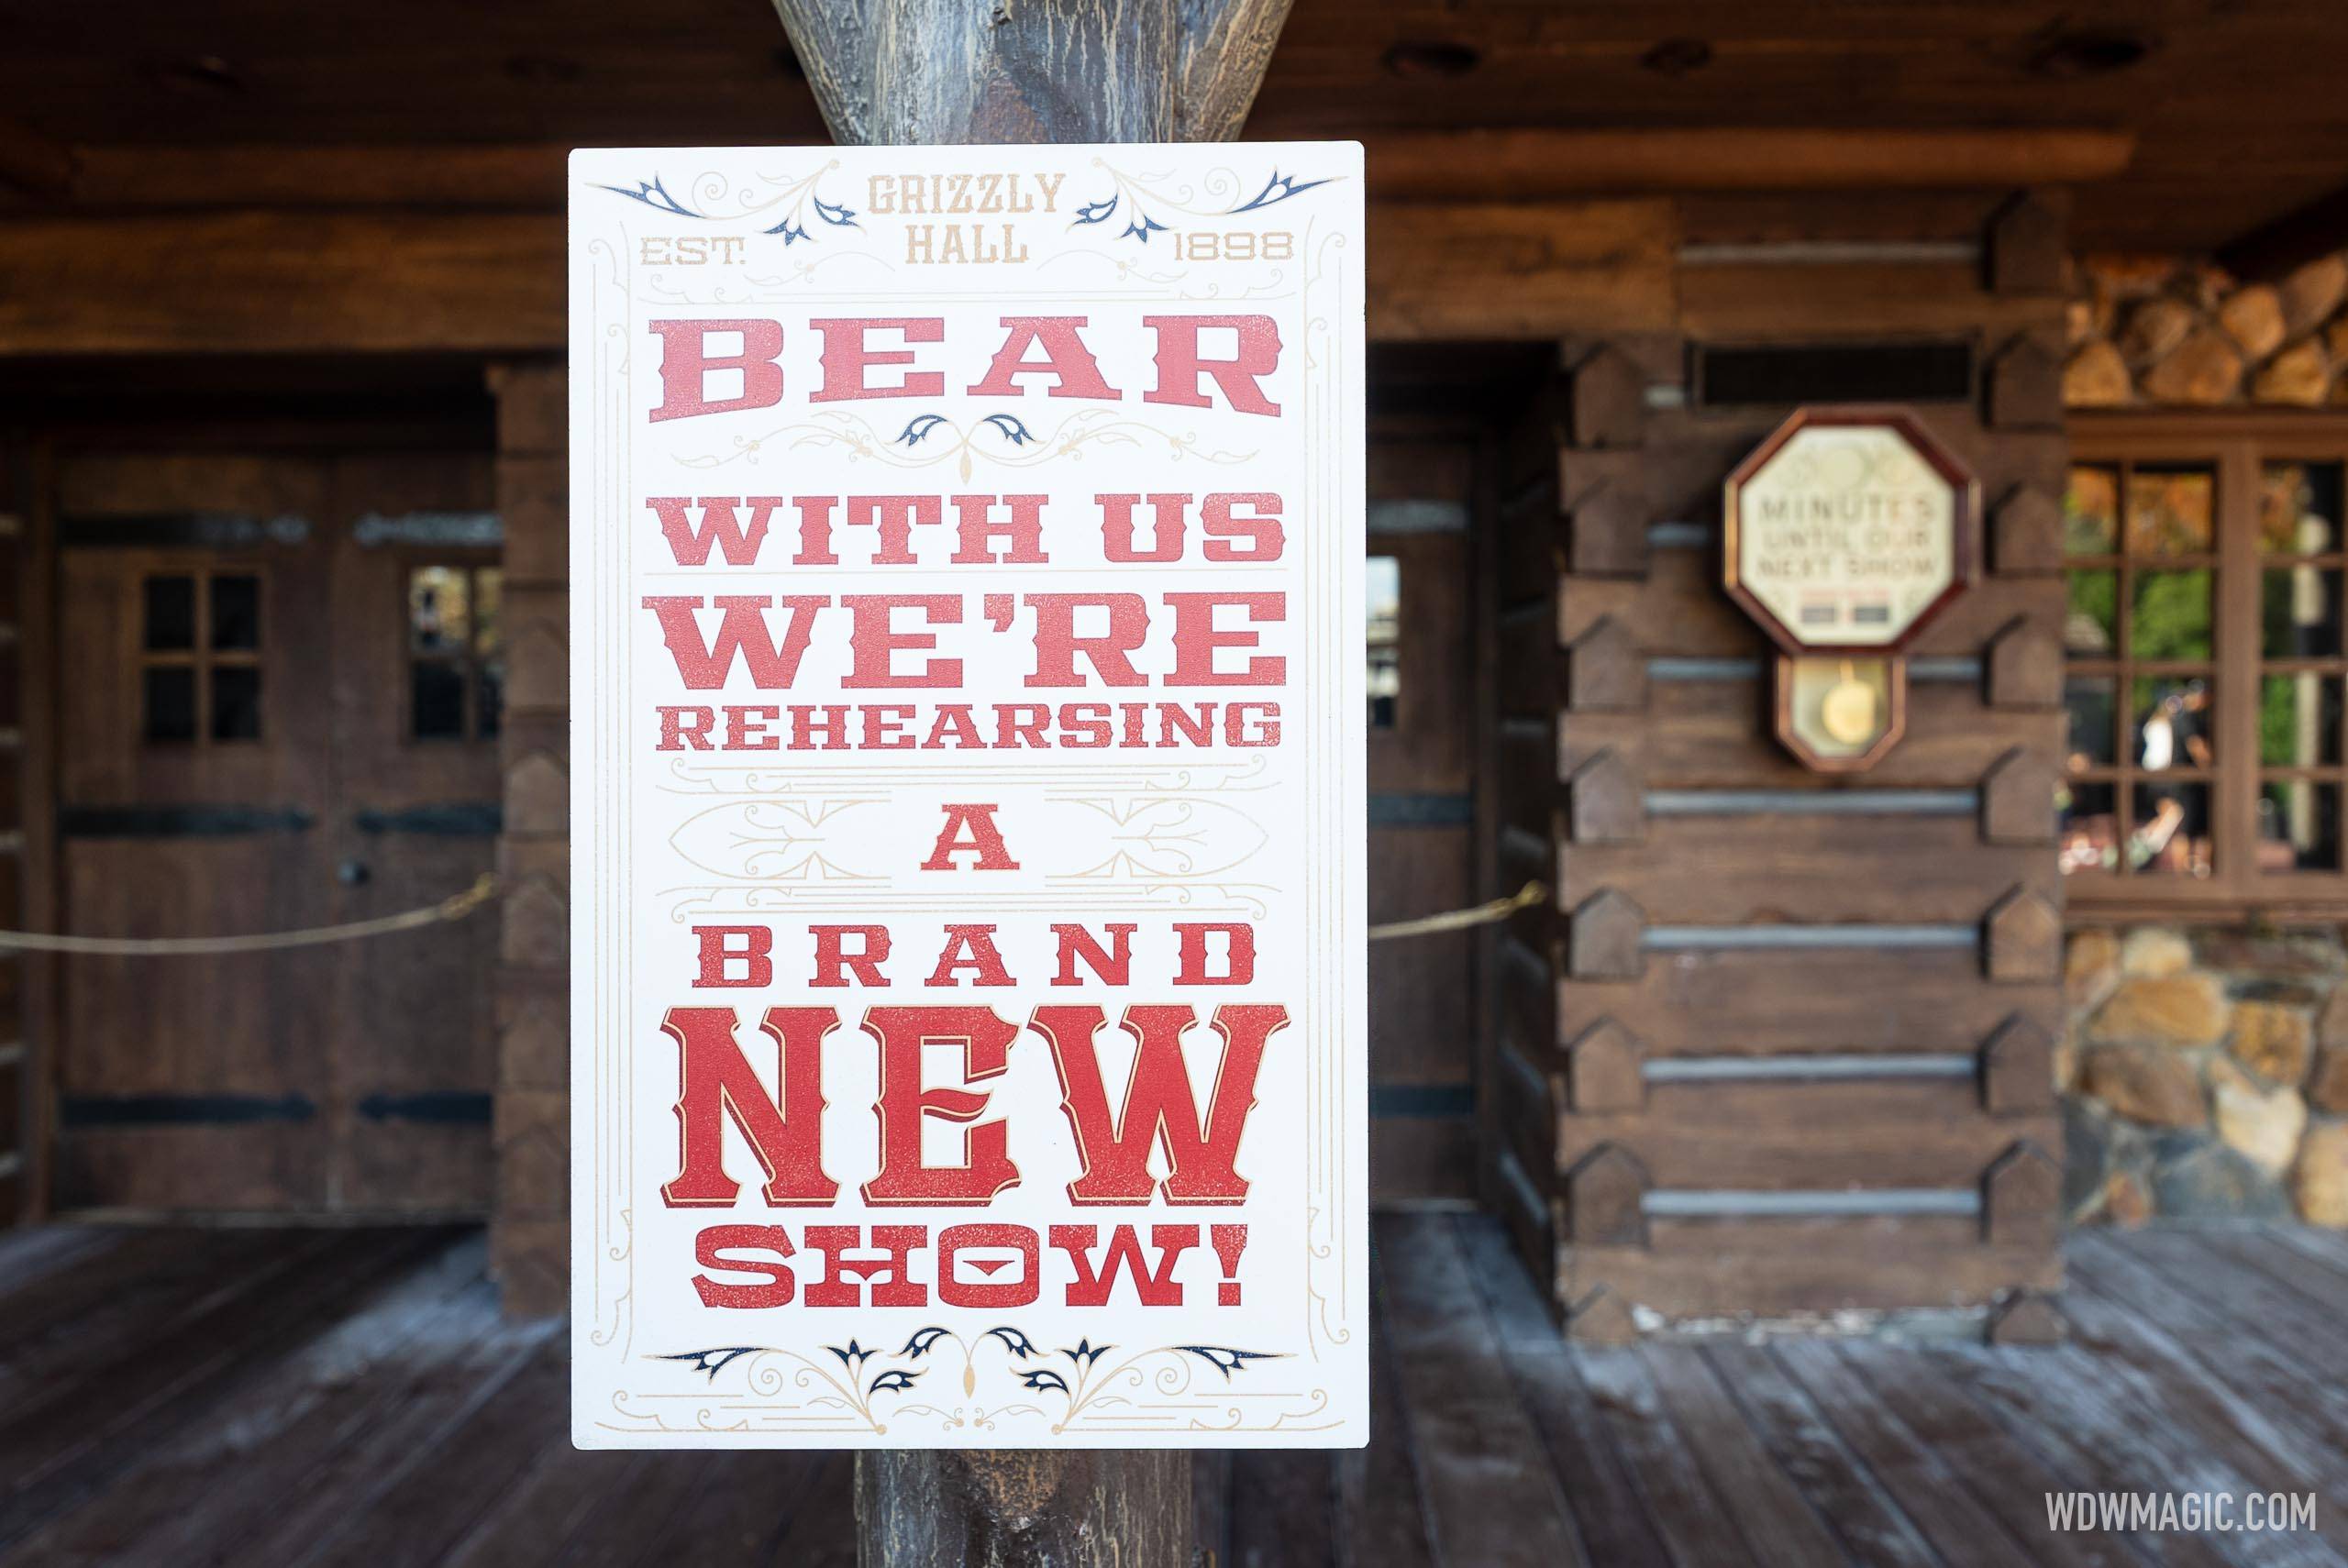 Permits filed for new set elements at Country Bear Musical Jamboree 